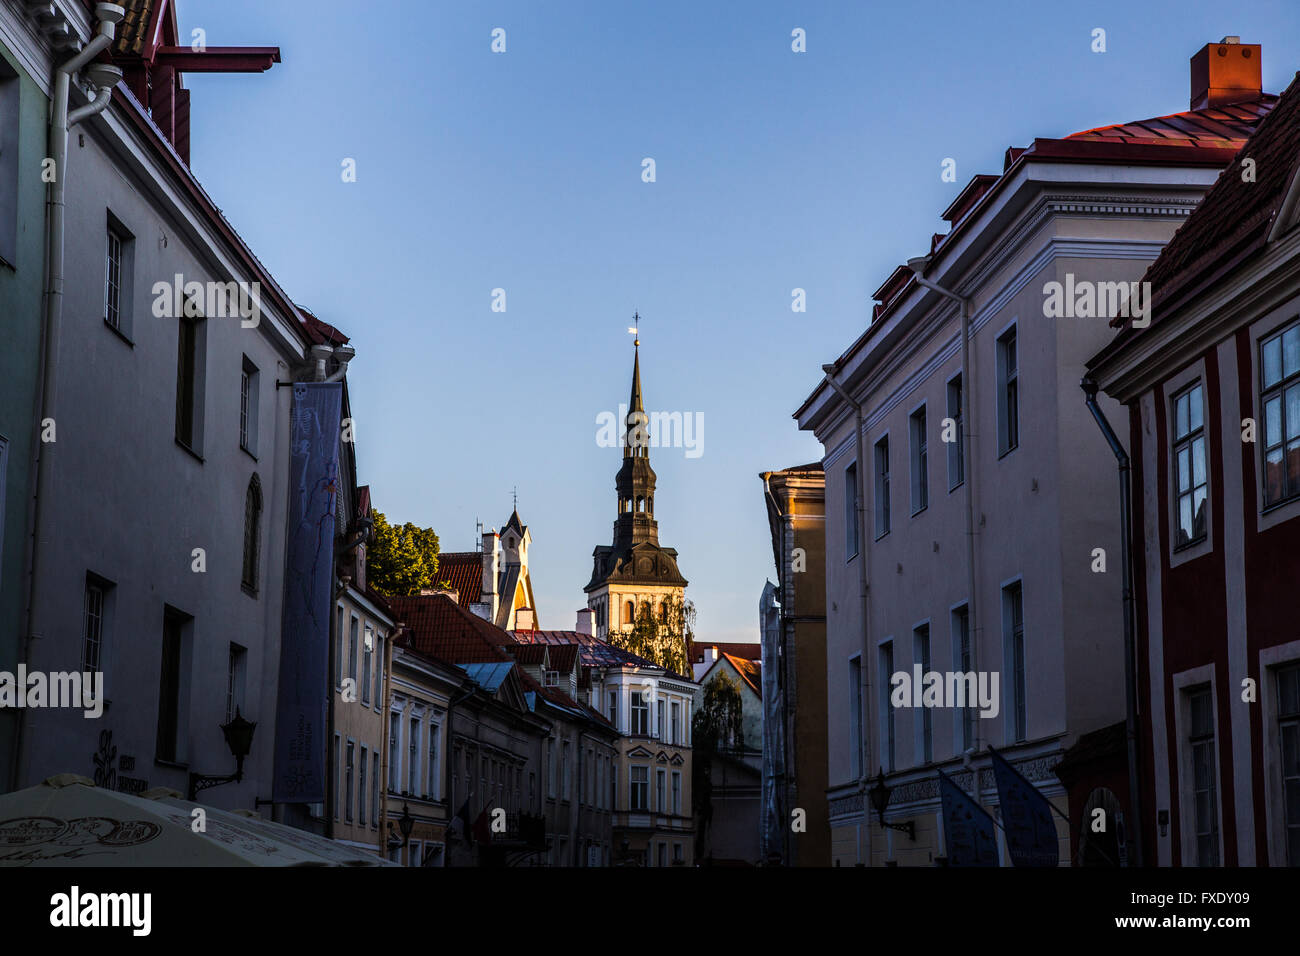 Cathedral of St Mary the Virgin or Dome Church, Tallinn, Estonia Stock Photo